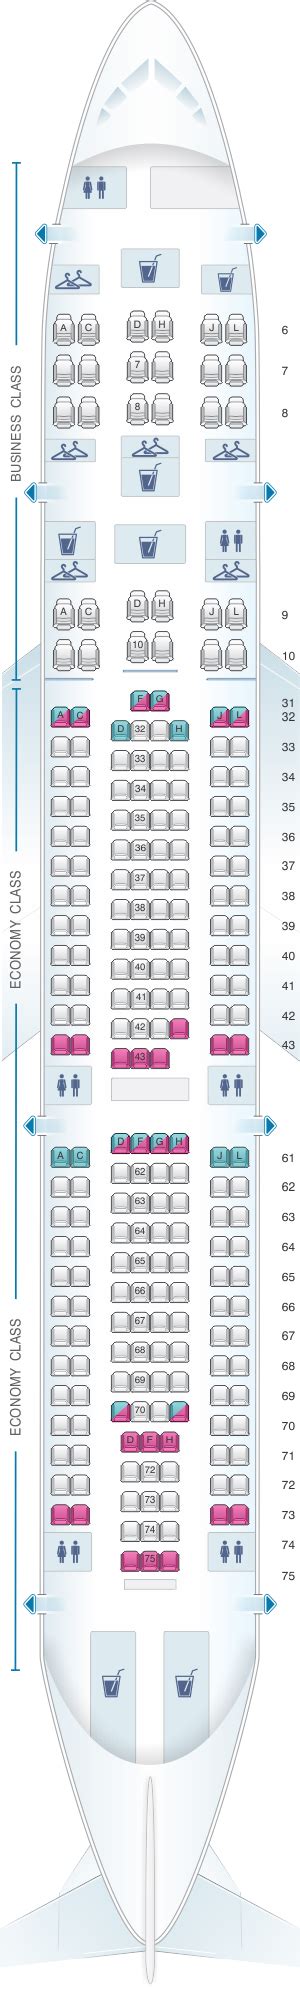 Seat Map China Eastern Airlines Airbus A330 200 234pax Seatmaestro